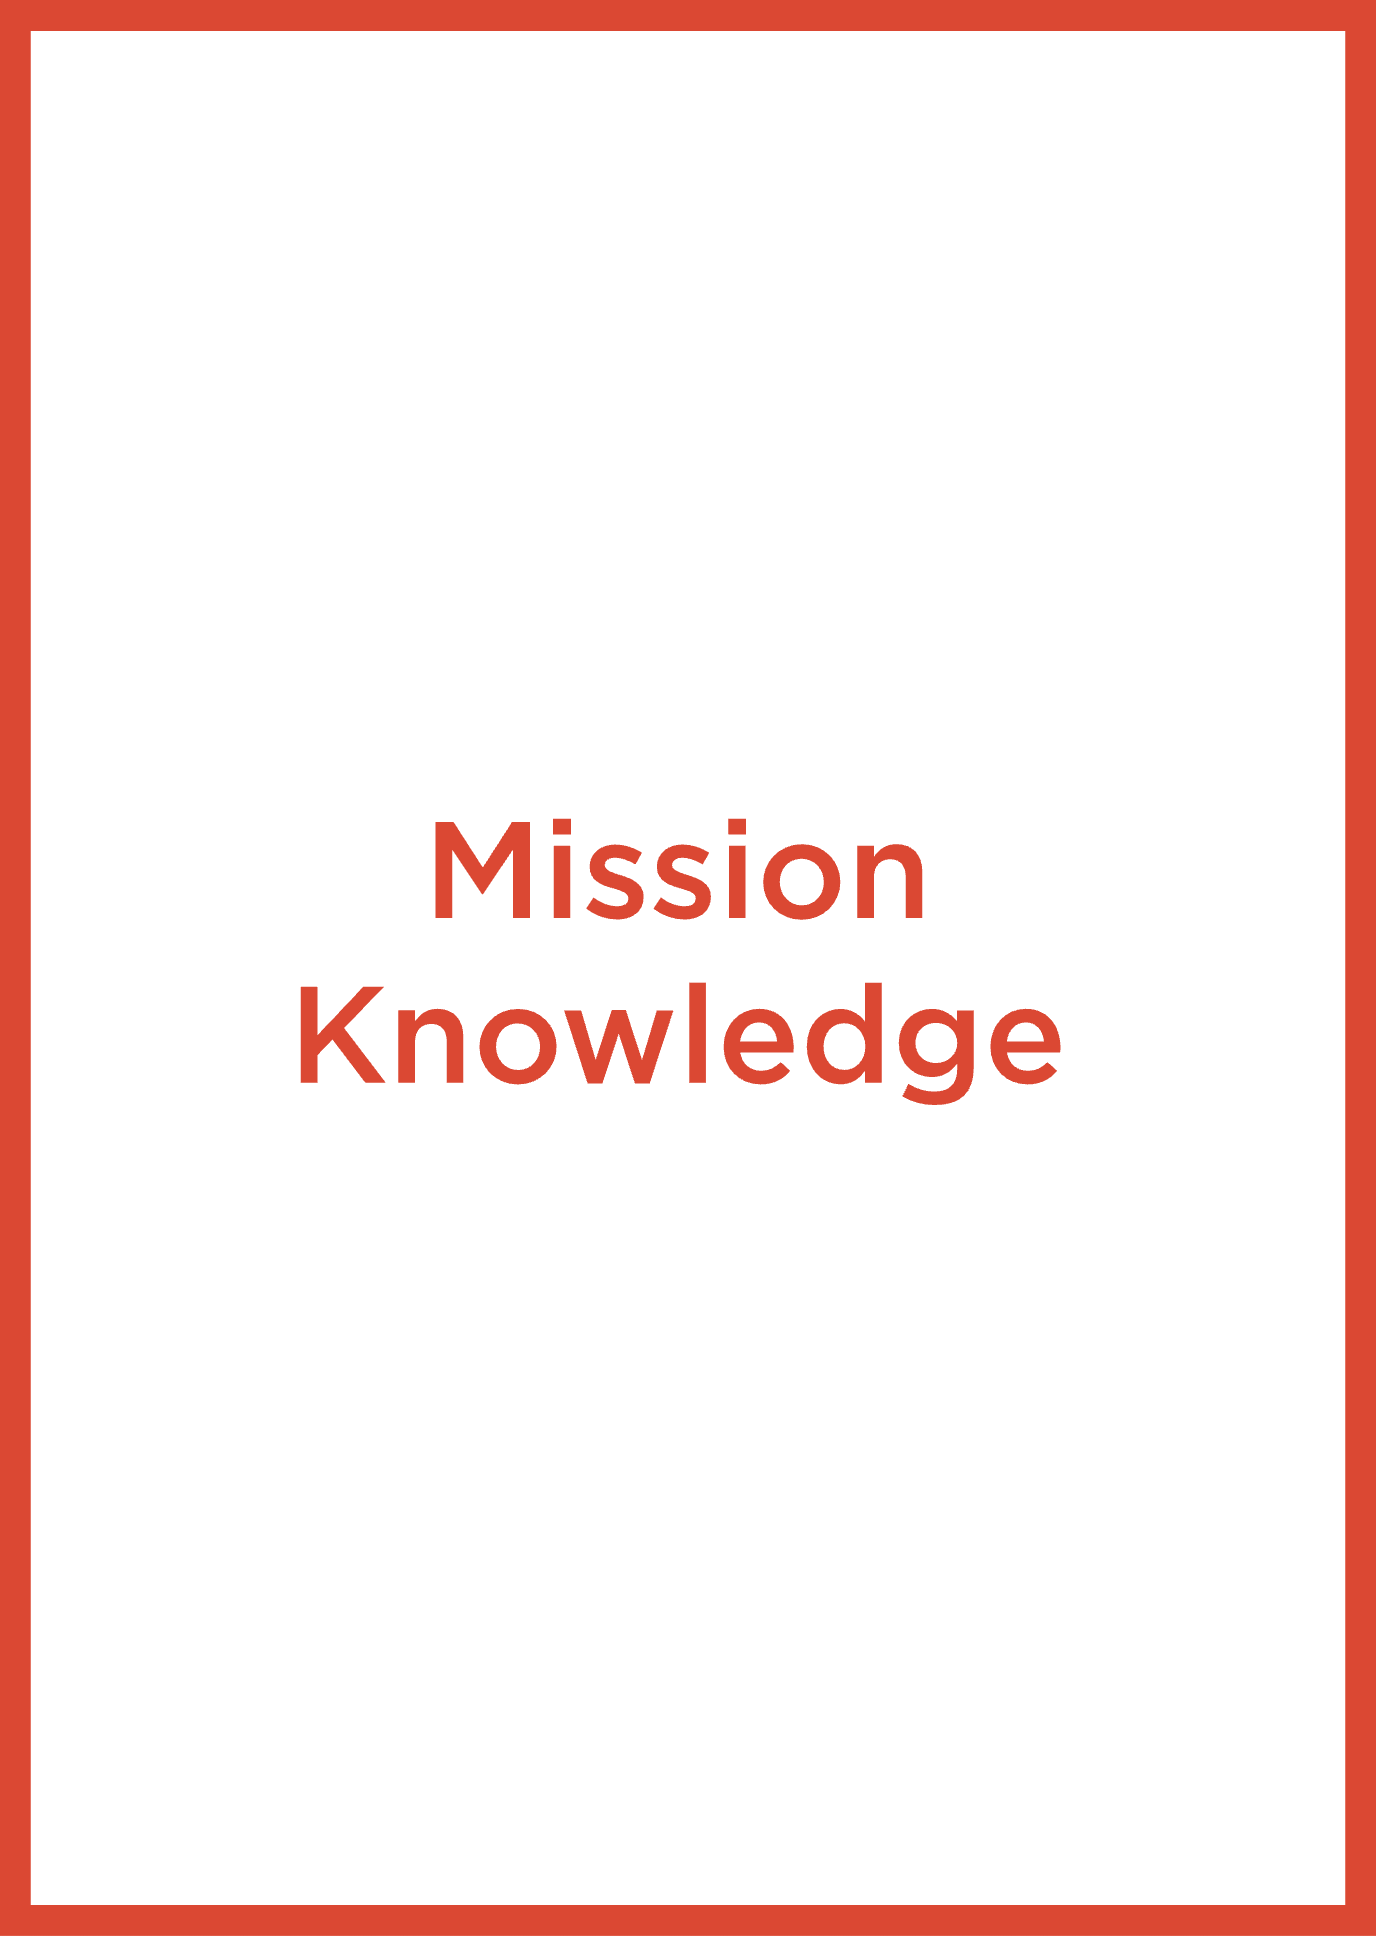 Mission Knowledge